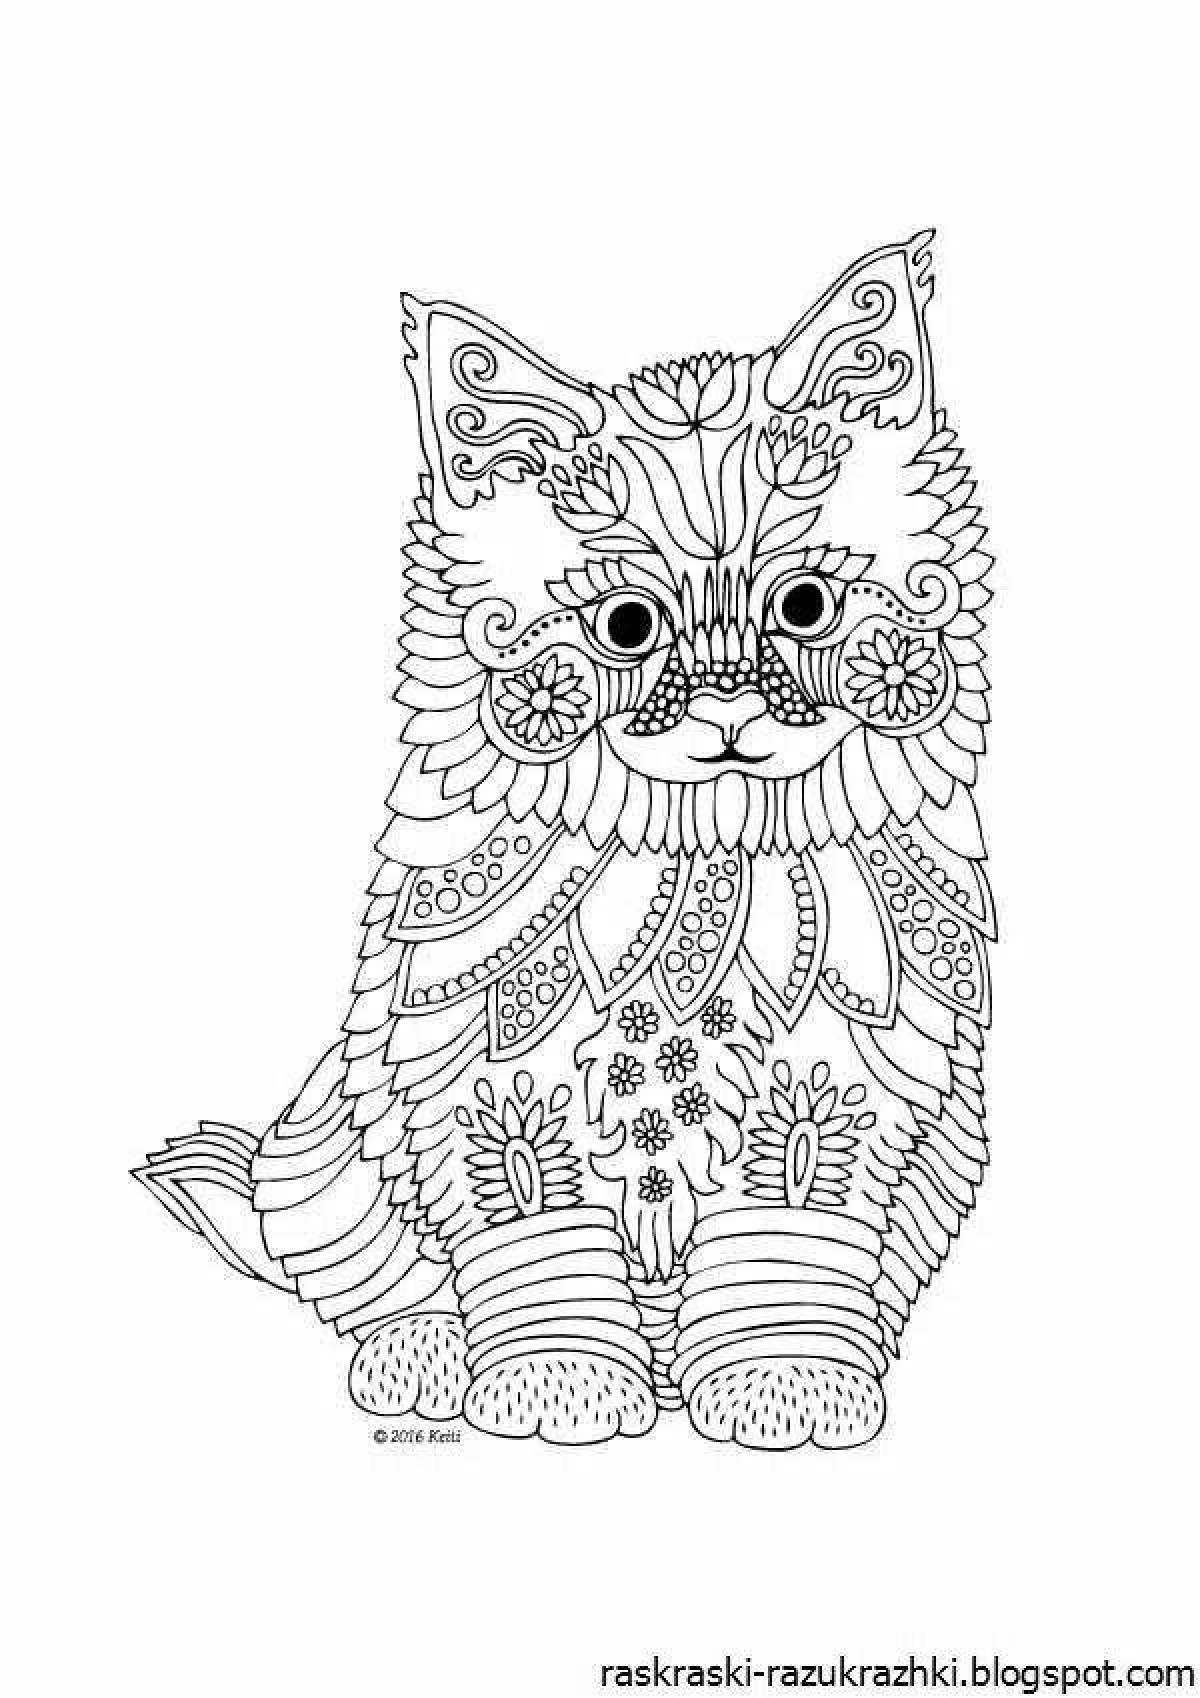 Amazing coloring pages of complex cats